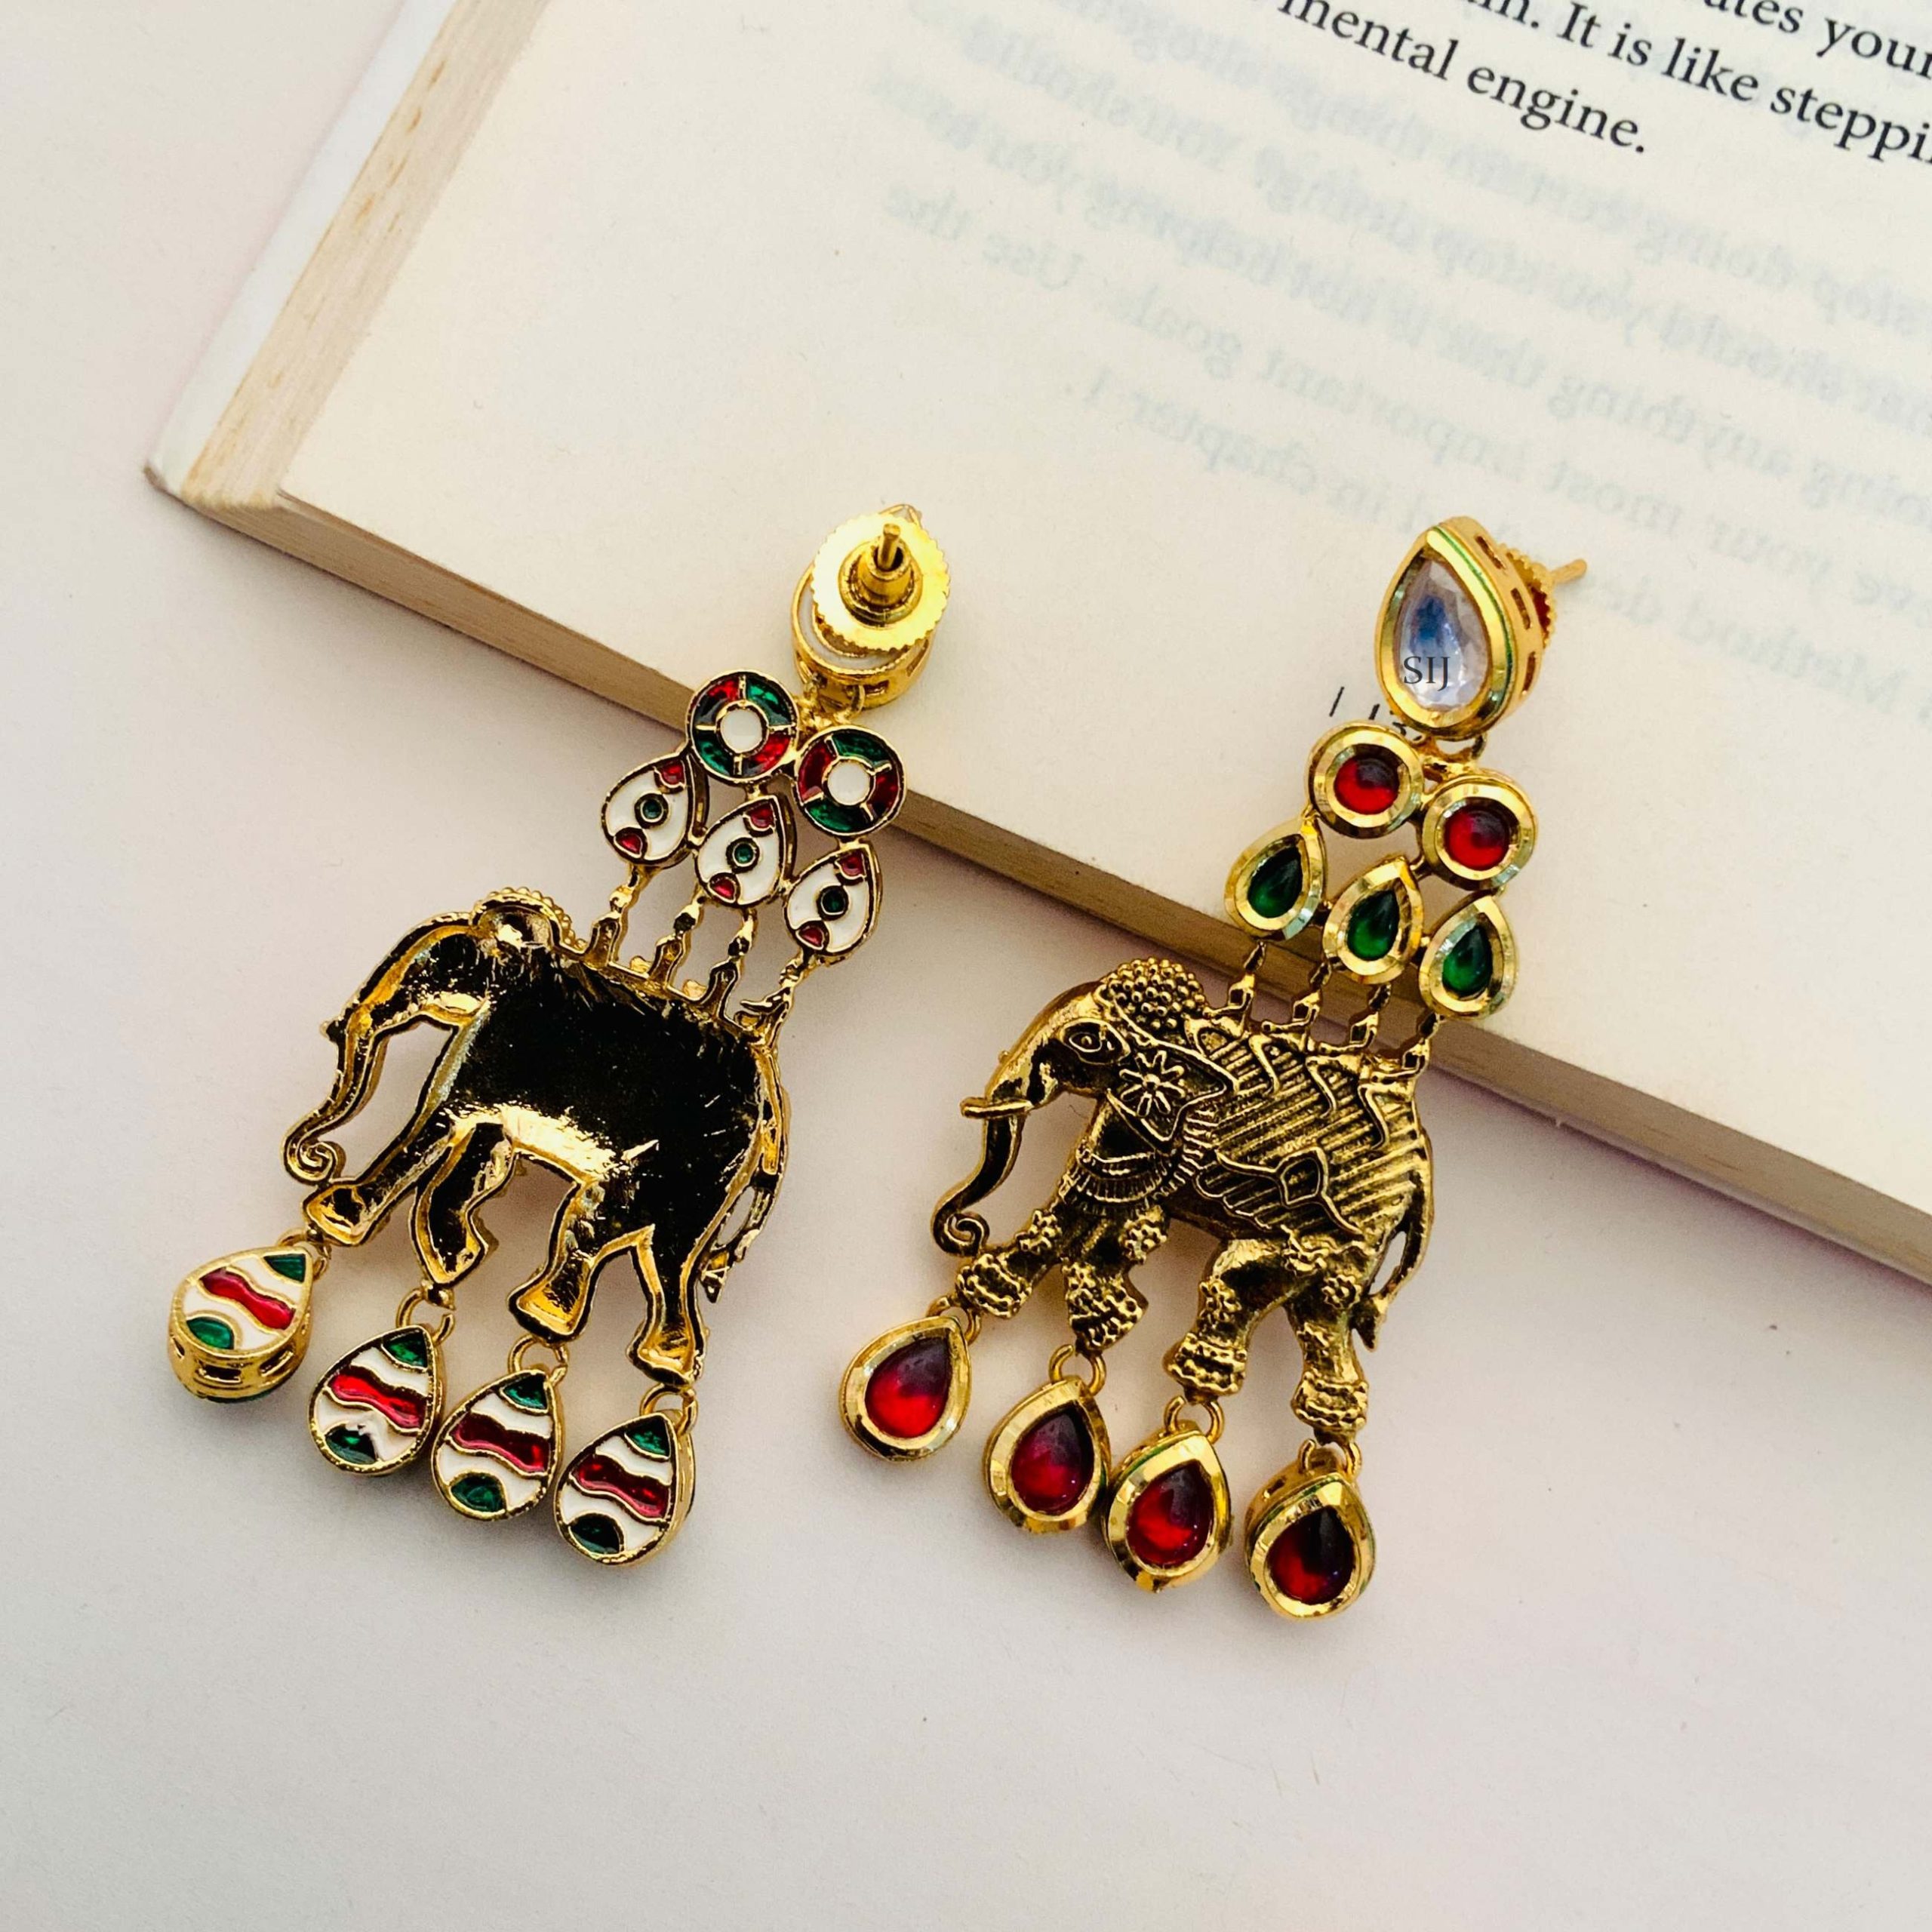 Antique Temple Earrings with Elephant Hangings